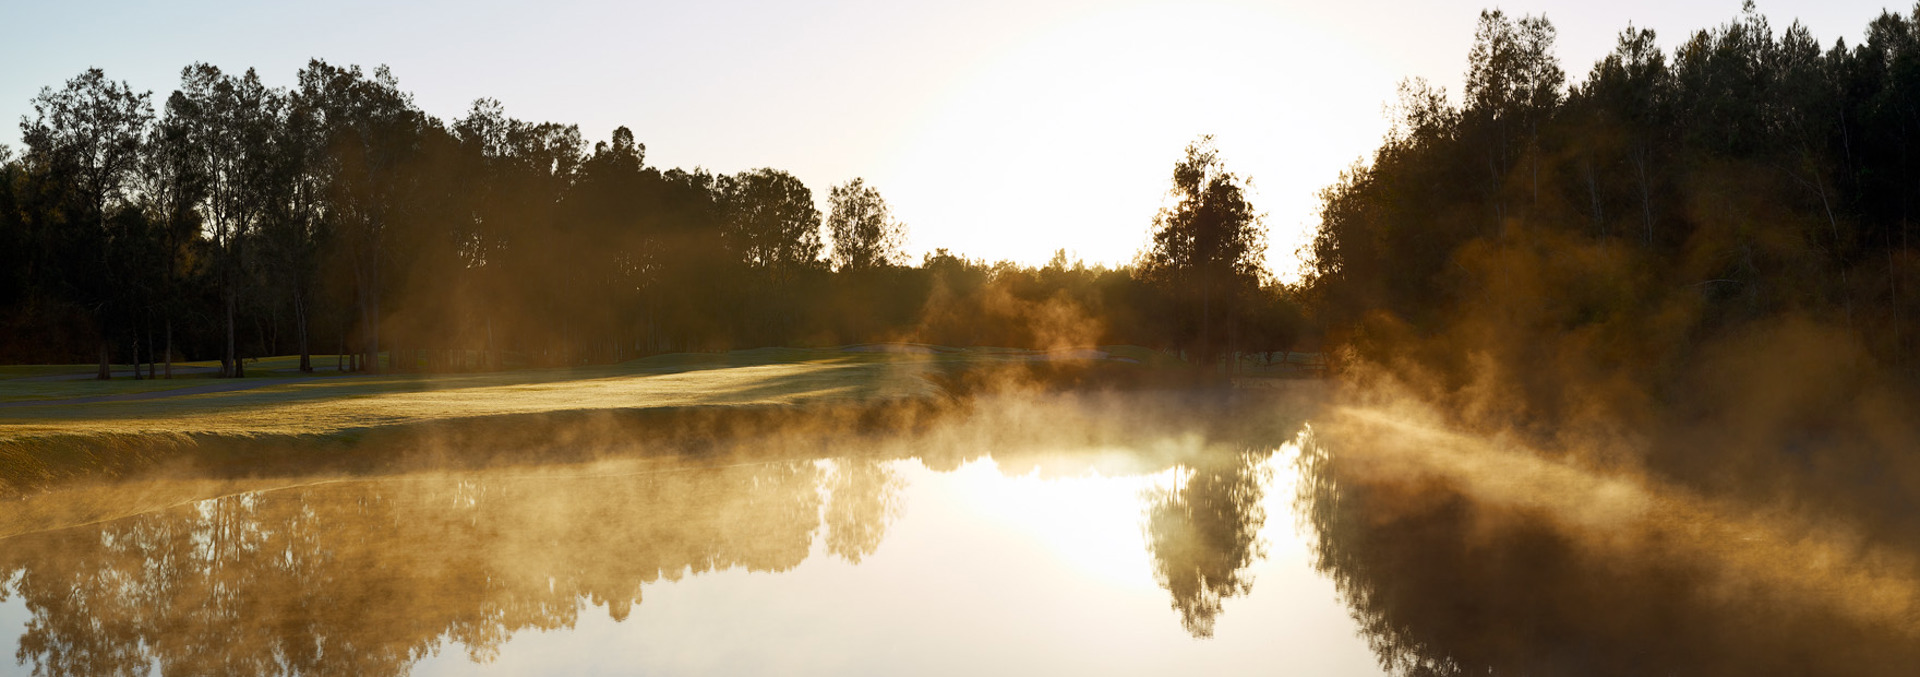 Photo of Gainsborough Greens golf course lake with sun reflection on water and steam coming off the lake